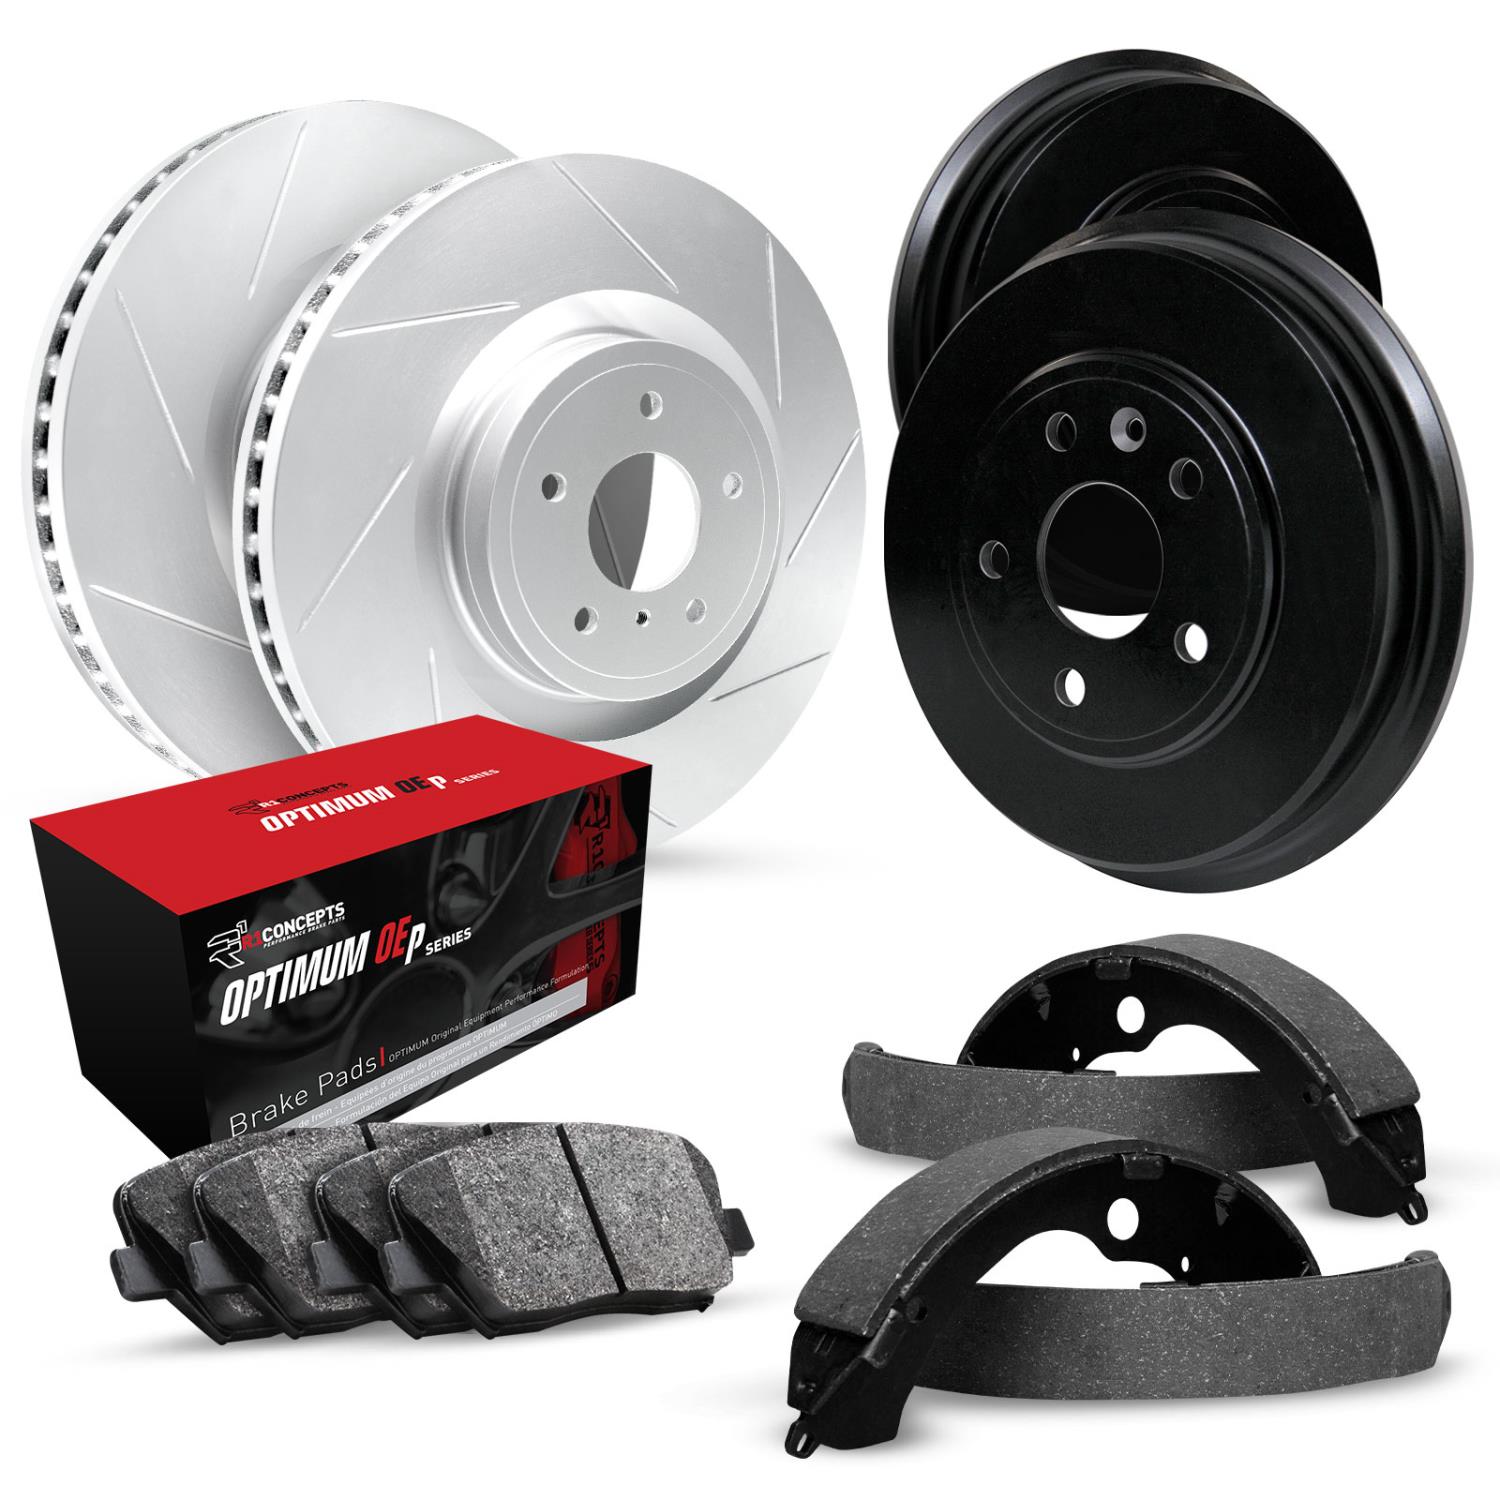 GEO-Carbon Slotted Brake Rotor & Drum Set w/Optimum OE Pads & Shoes, 1995-1996 Ford/Lincoln/Mercury/Mazda